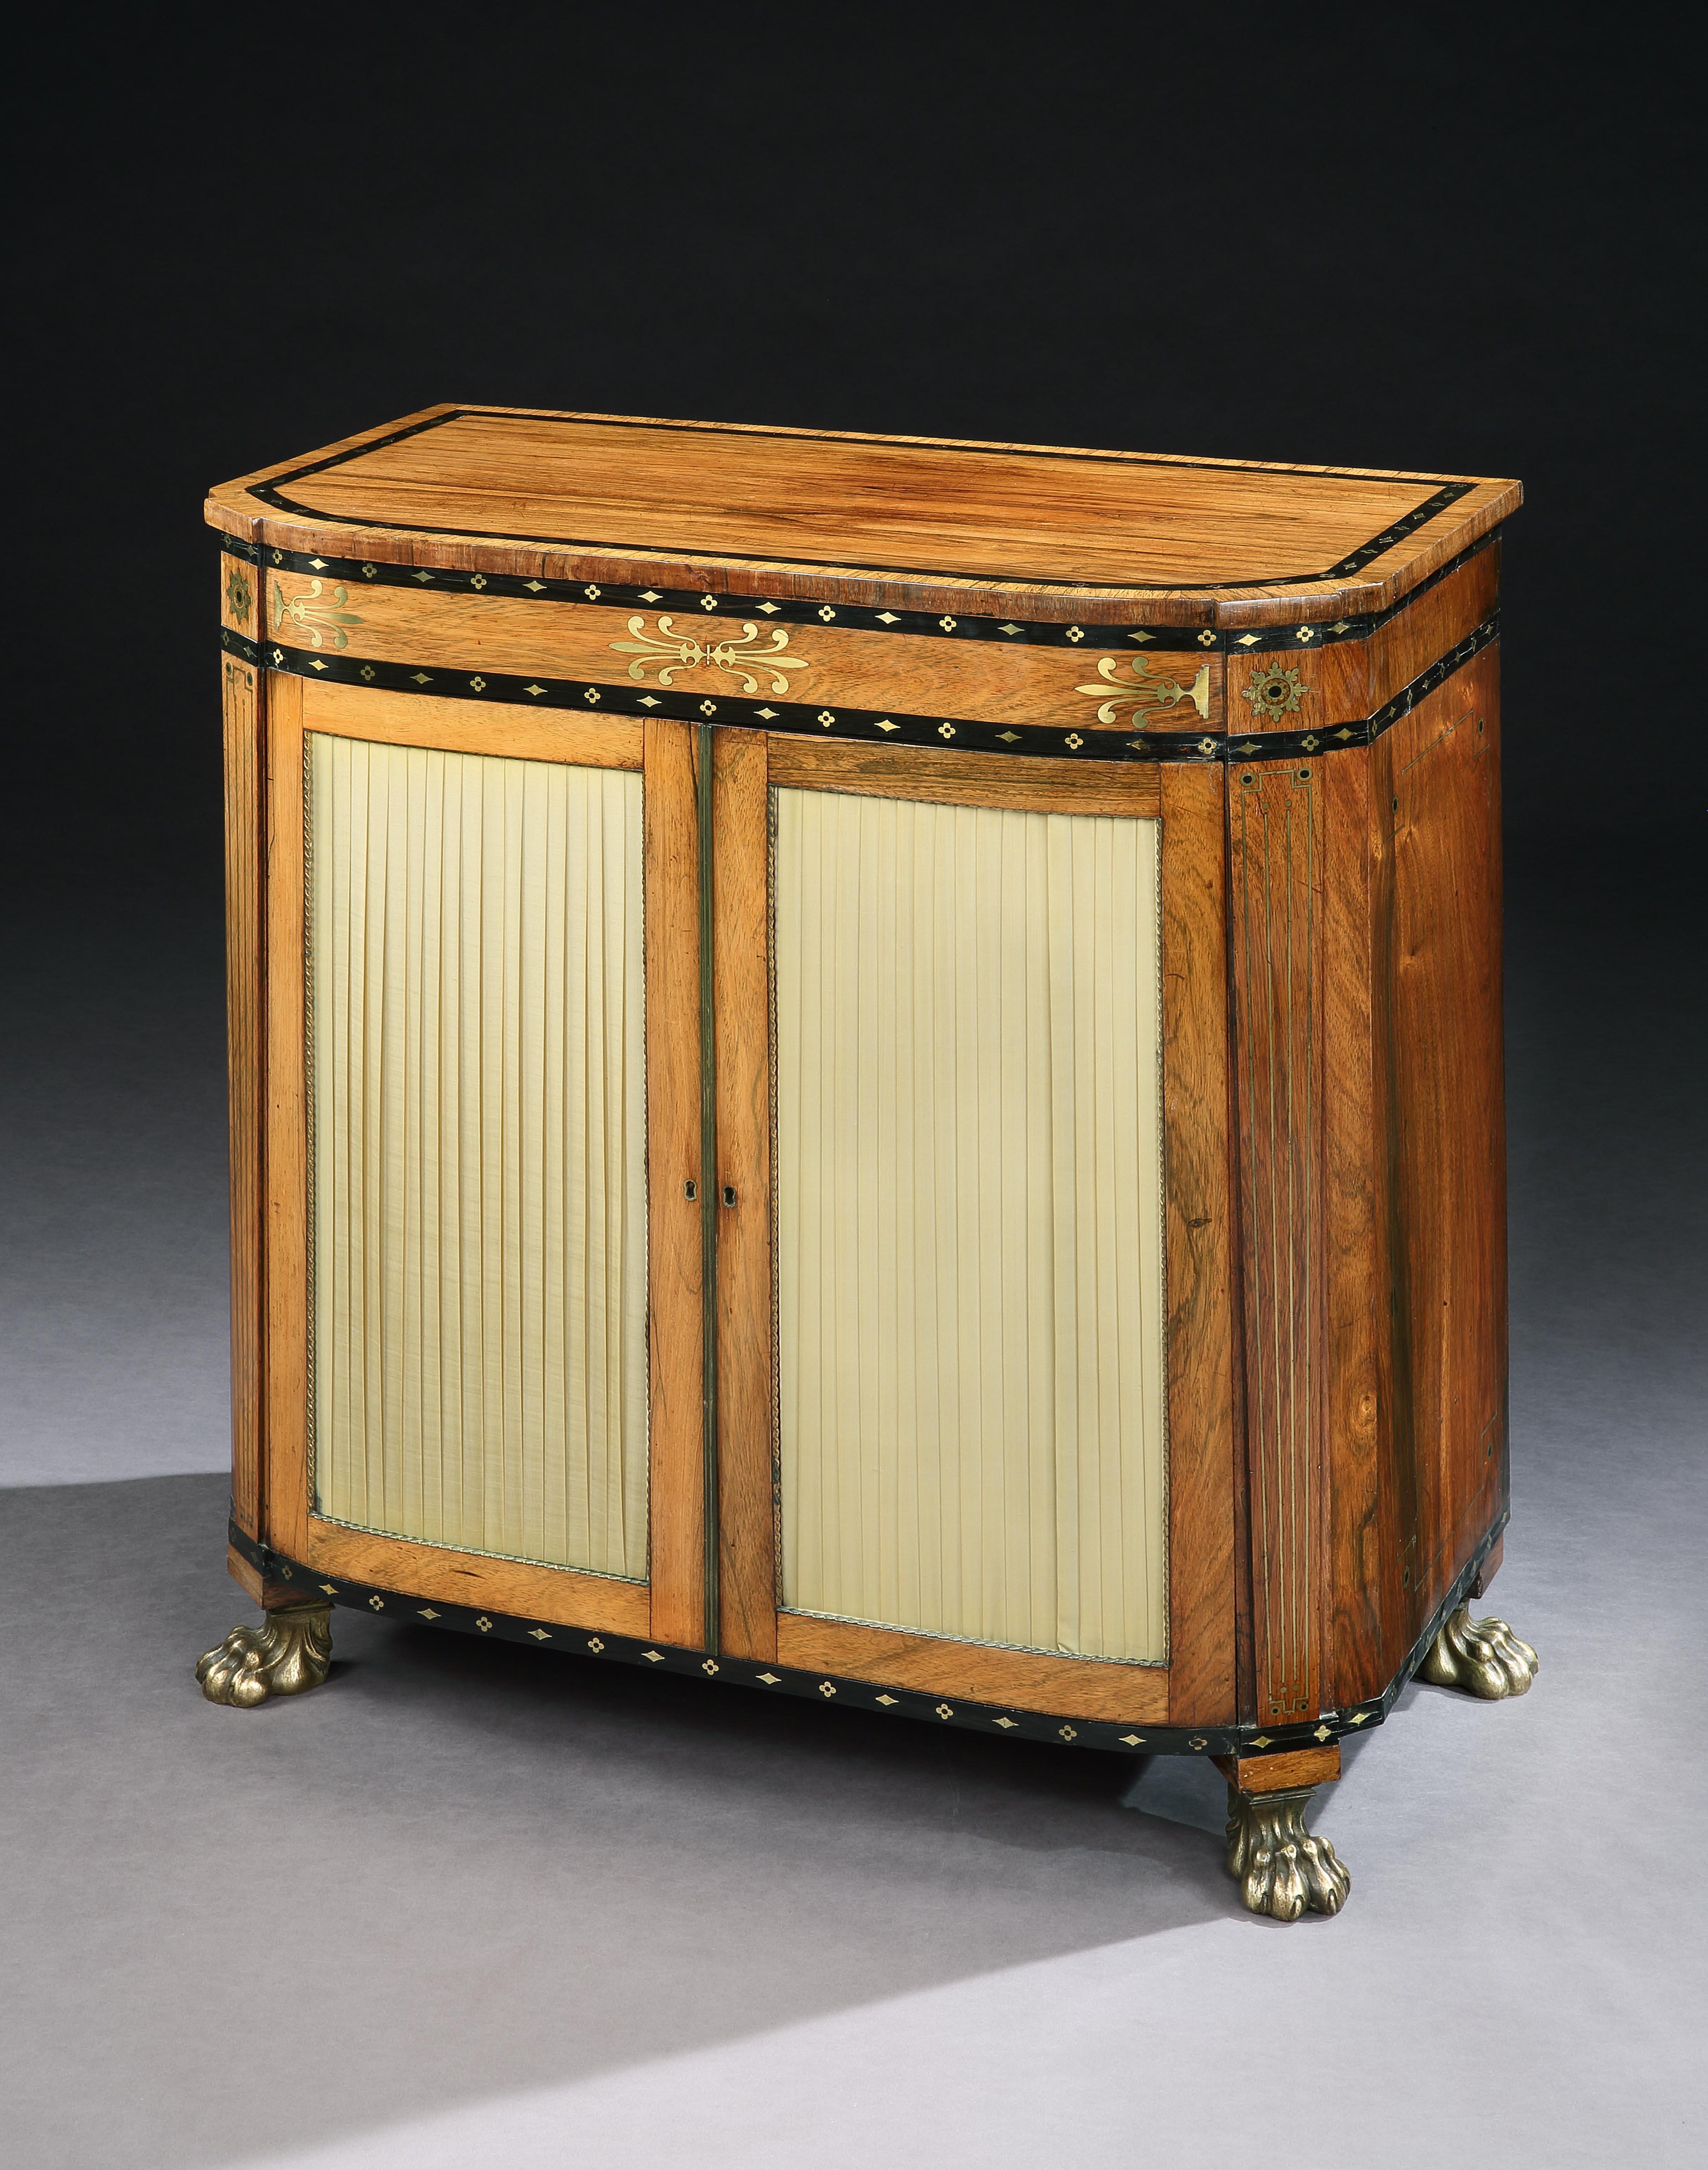 A elegant and quality Regency side cabinet in rosewood inlaid with brass and ebony inlay, the pleated panelled doors opening to reveal adjustable shelves, standing on brass paw castors.

 

English, circa 1810.

 

Provenance

Antique